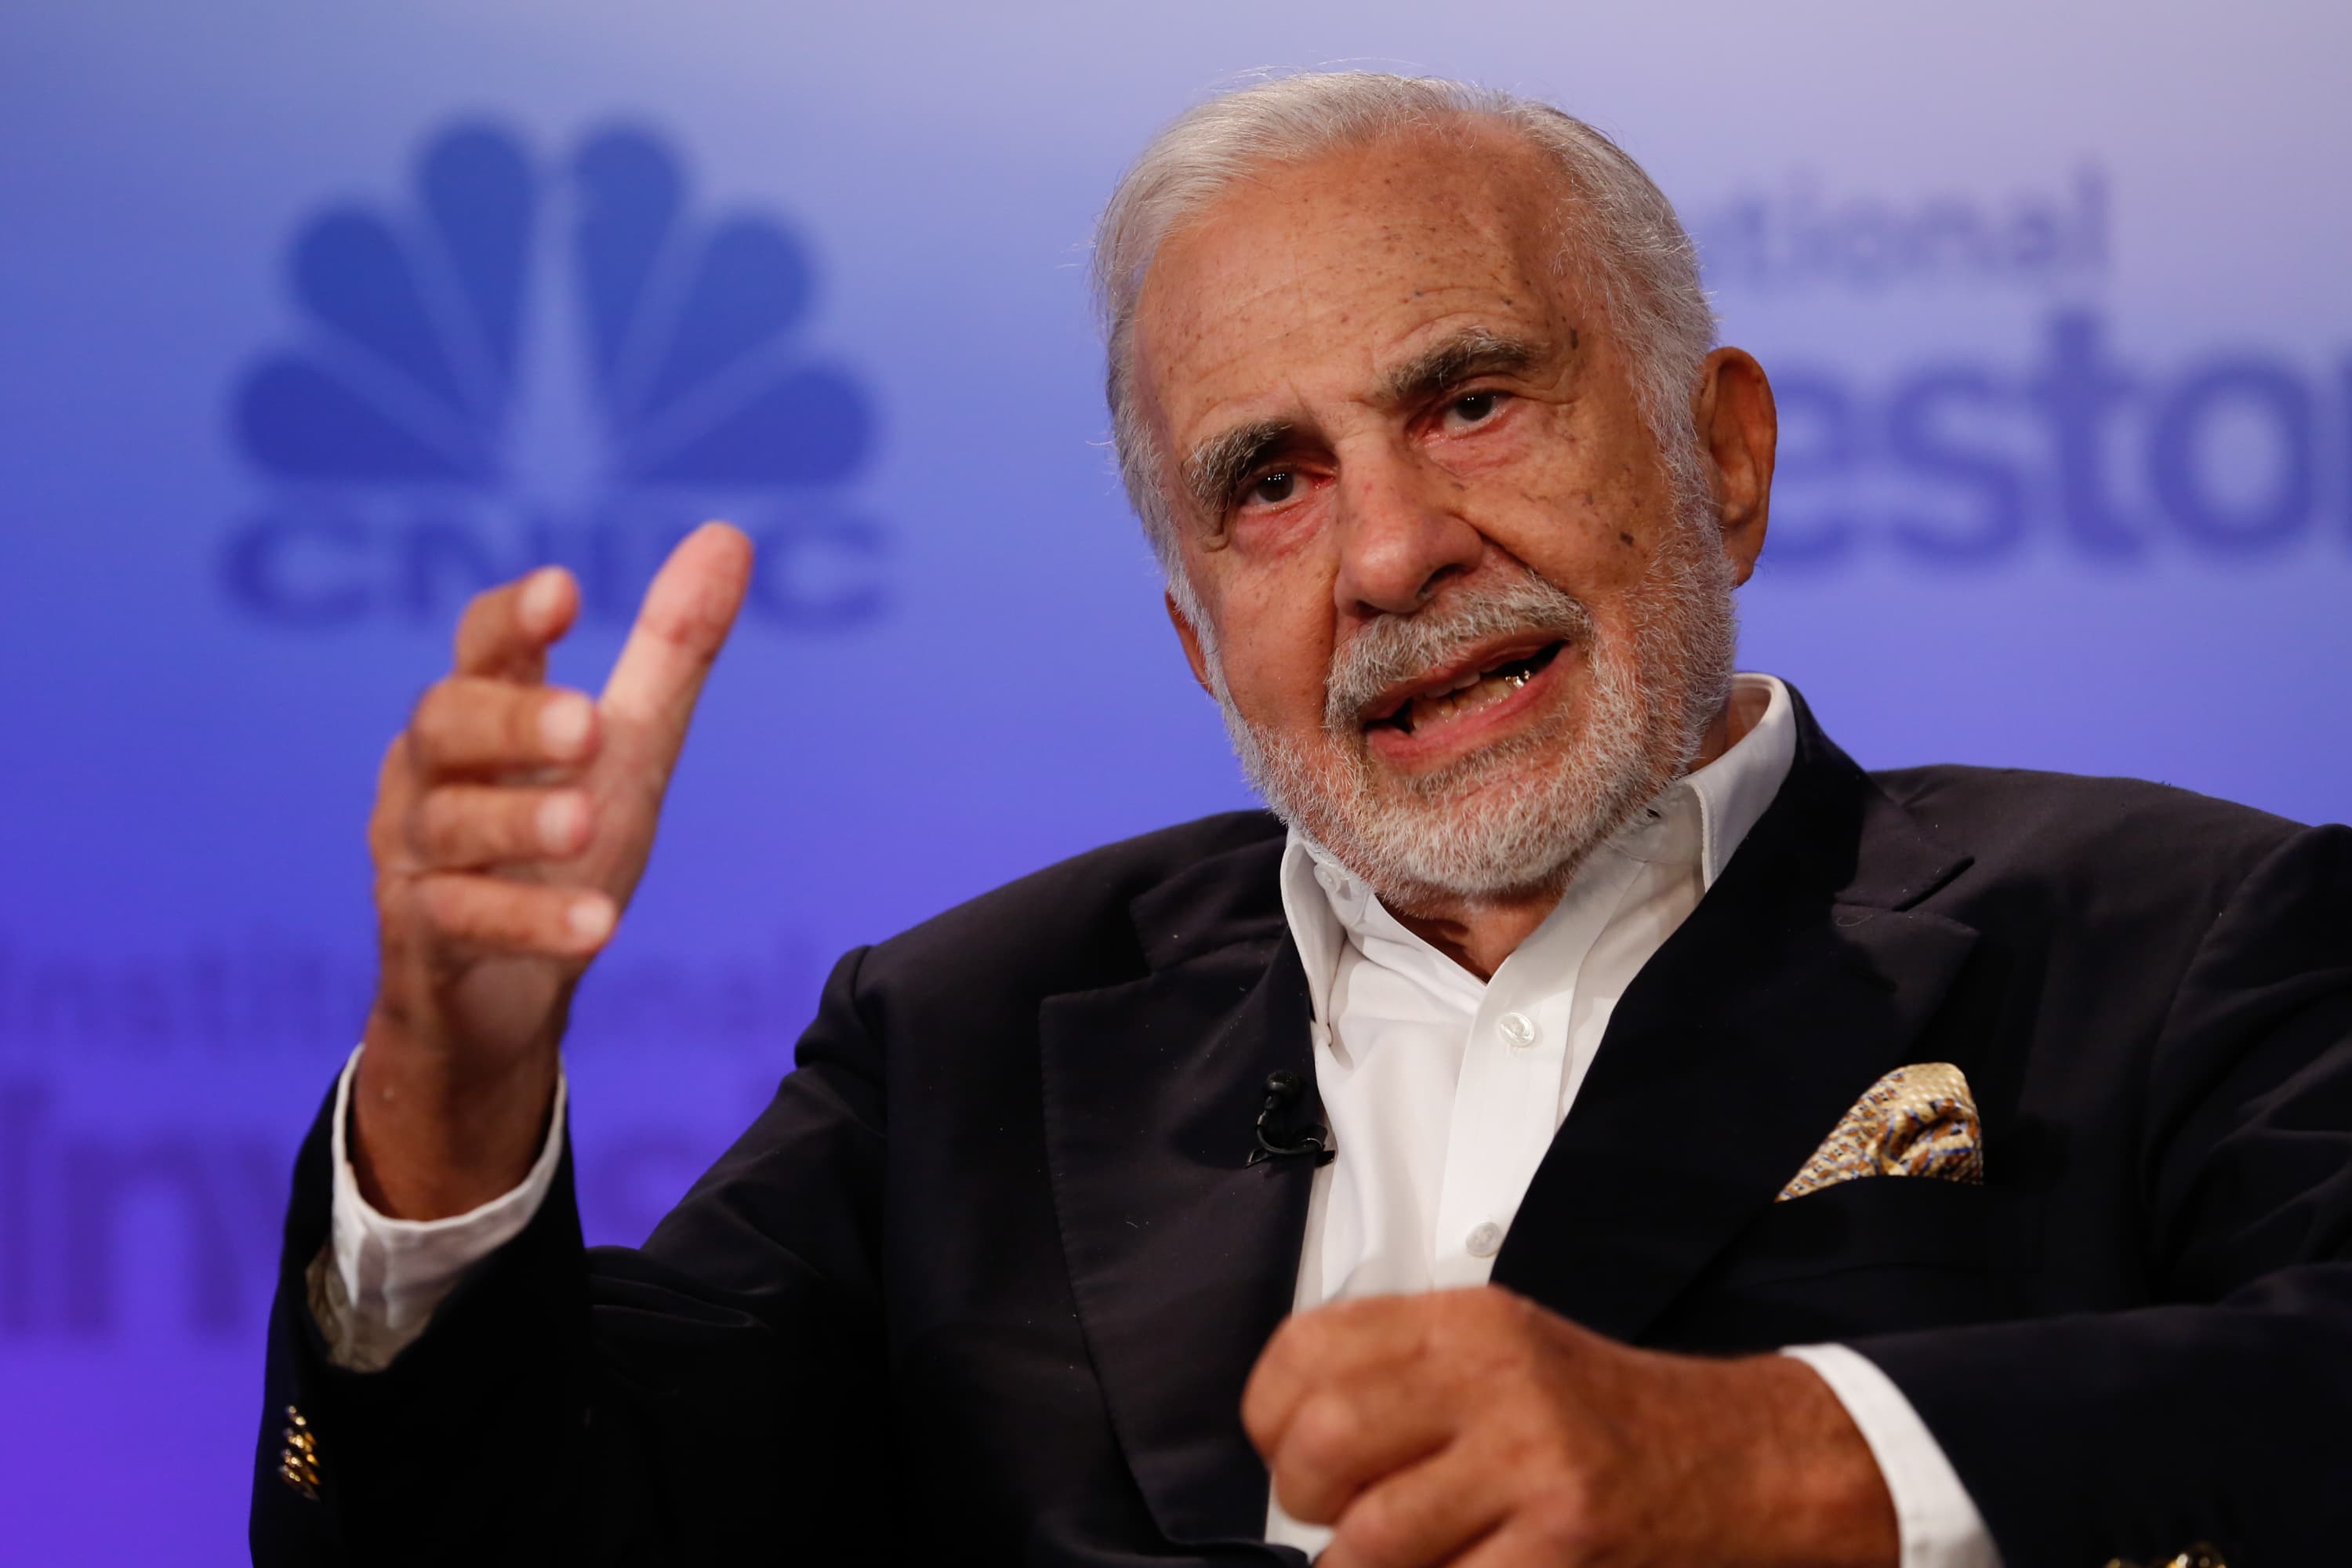 Carl Icahn warns that the market rally could end in a painful correction and is hedging accordingly